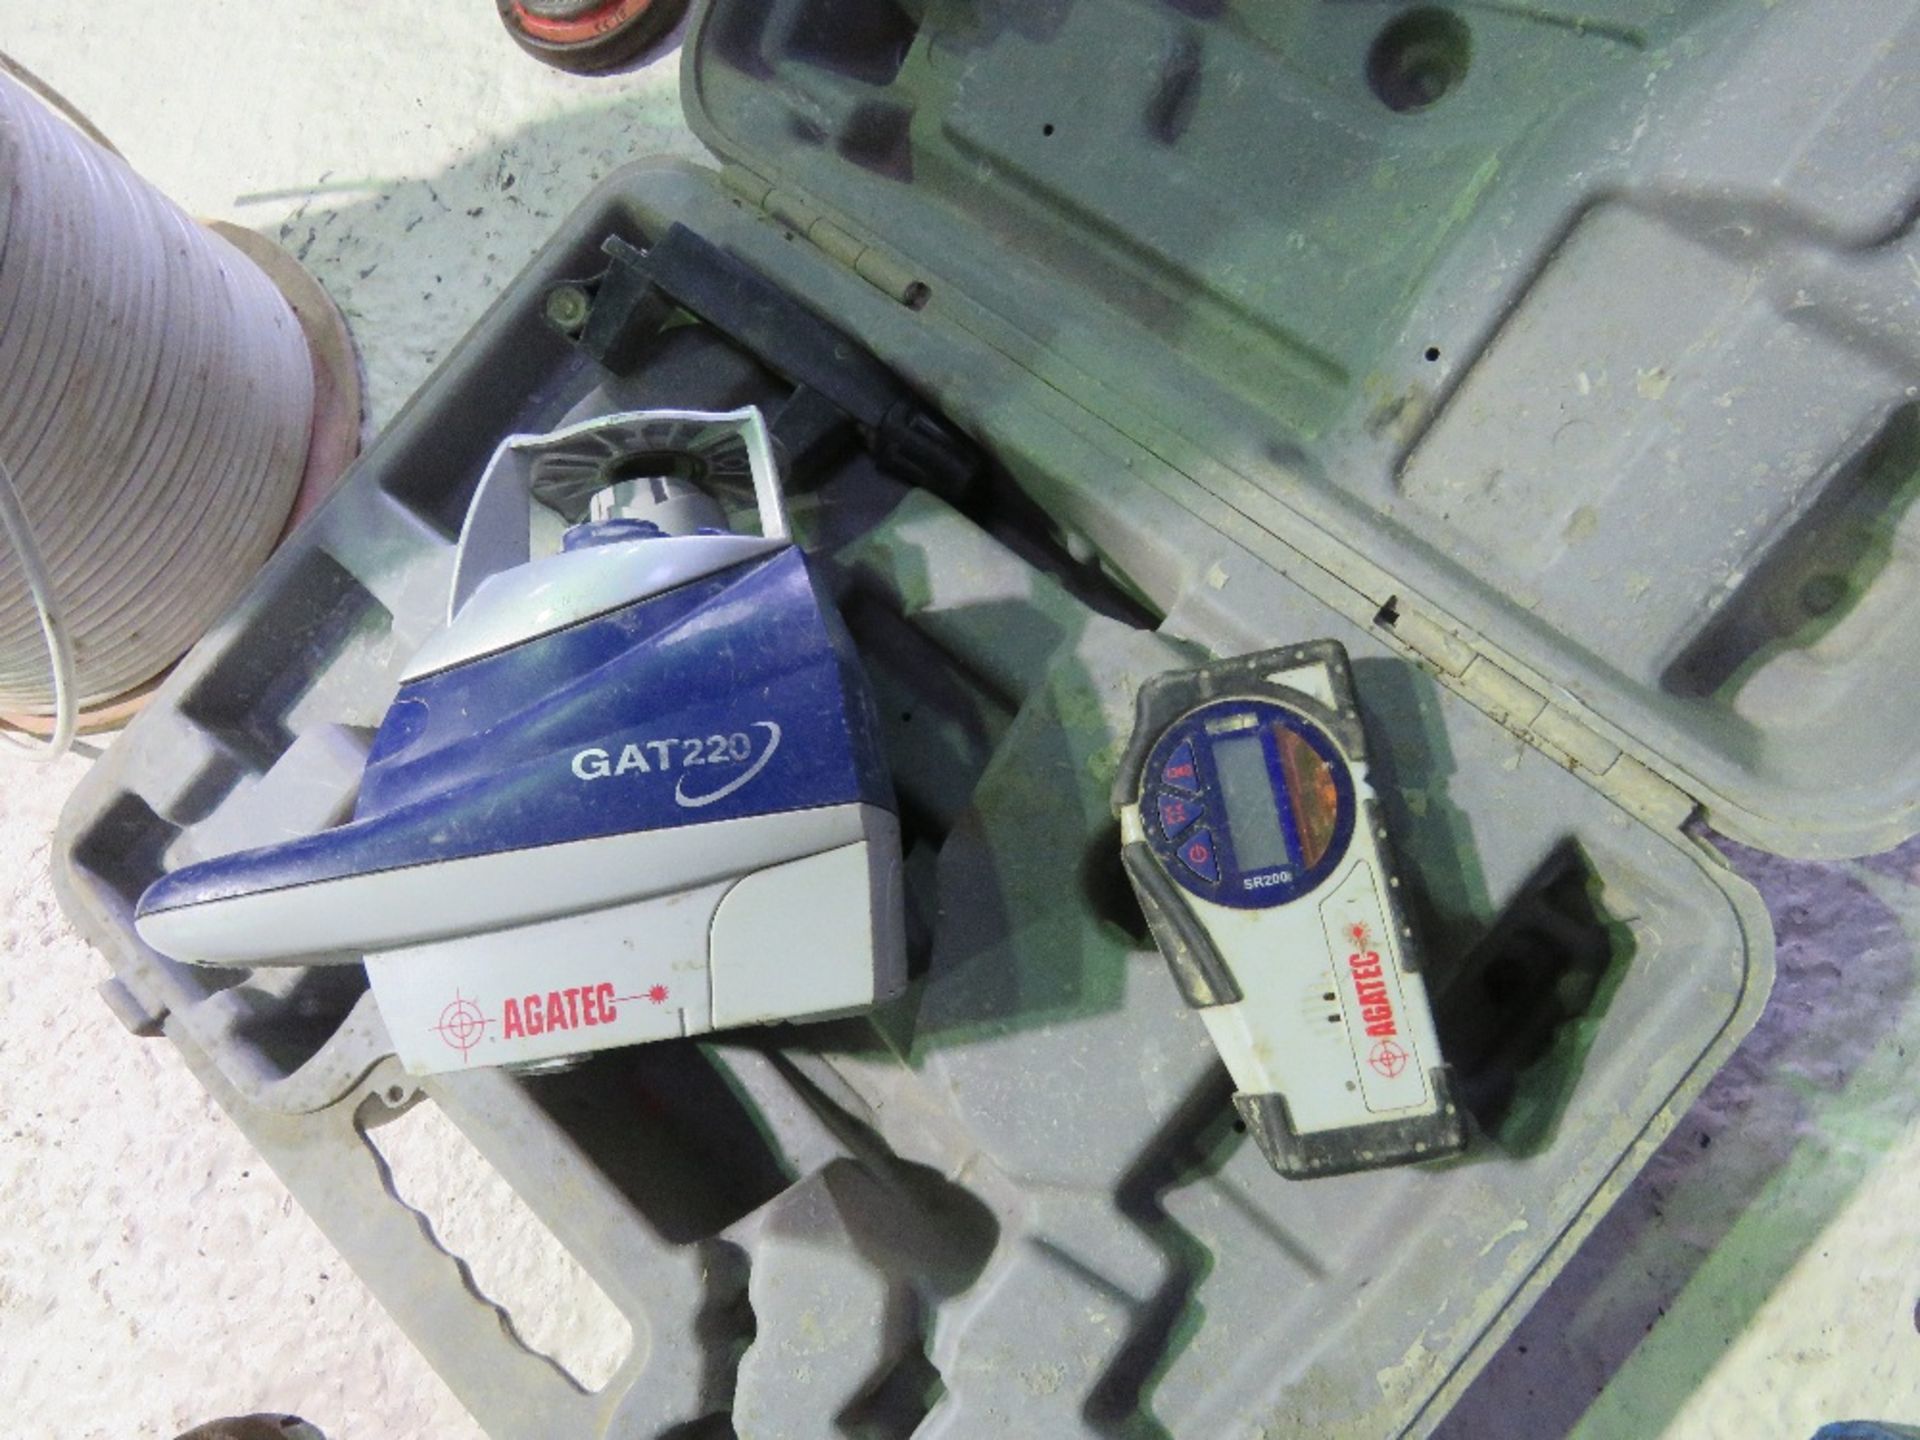 AGATEC LASER LEVEL IN A CASE, CONDITION UNKNOWN. - Image 3 of 3